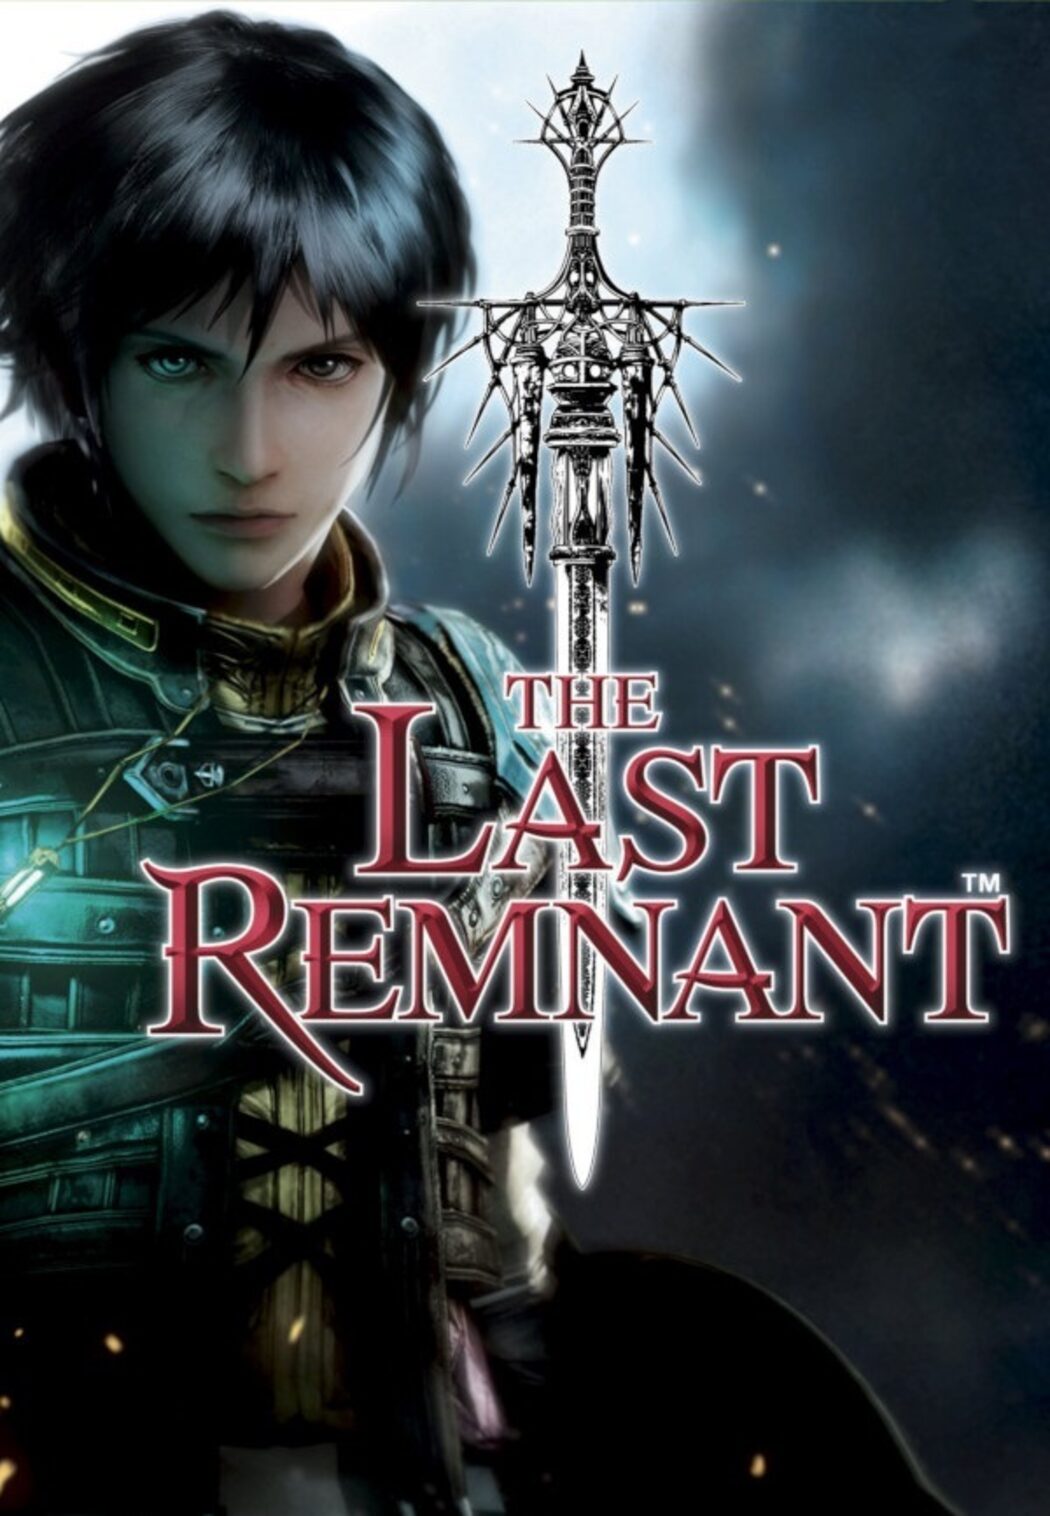 Last remnant steam фото 62